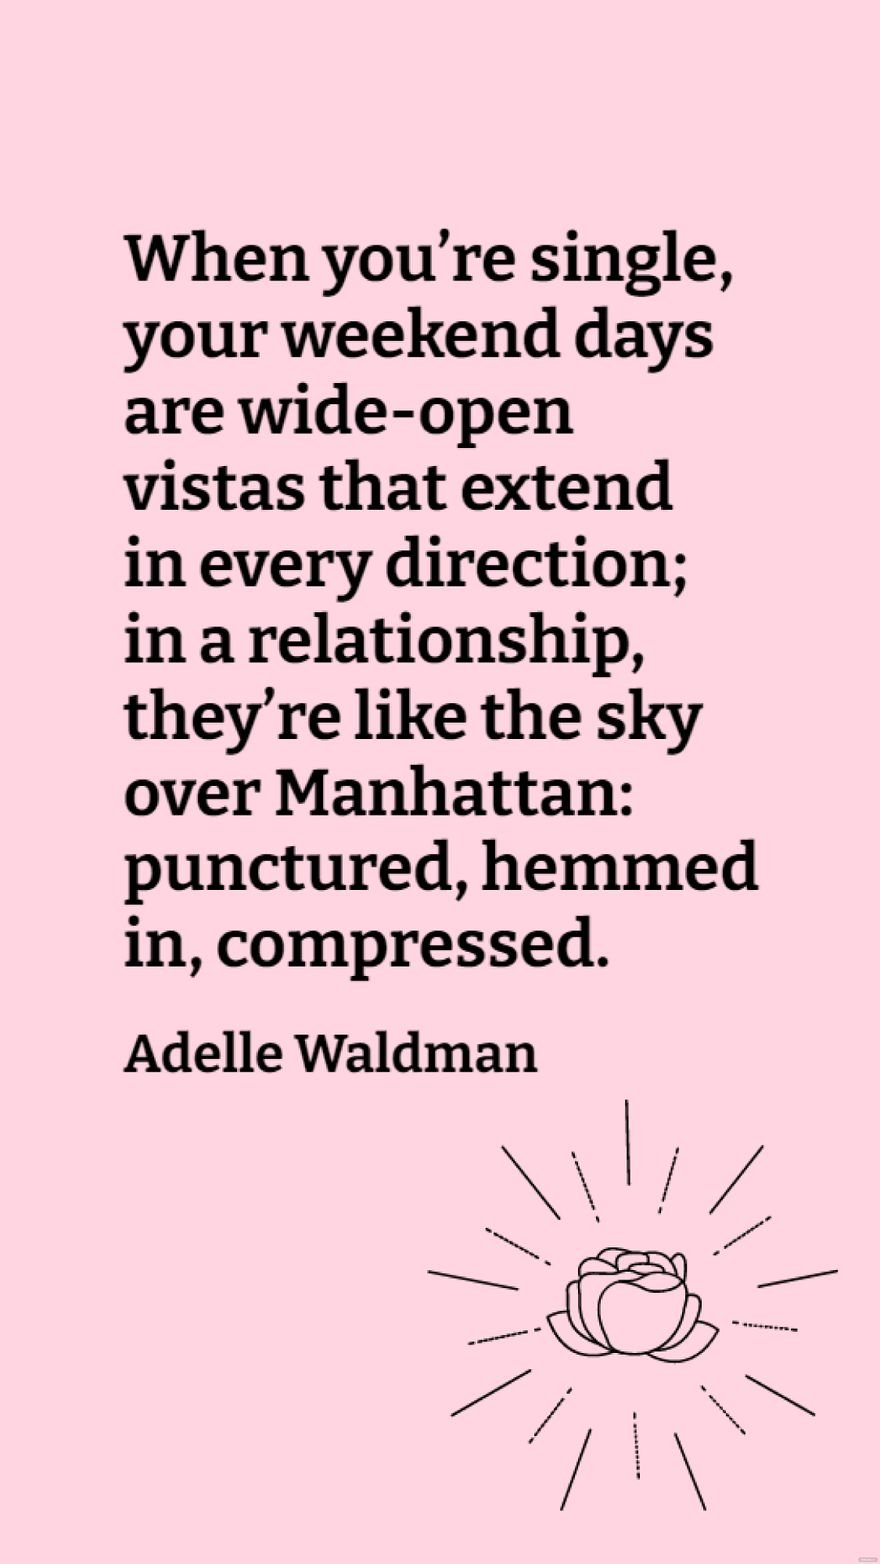 Adelle Waldman - When you’re single, your weekend days are wide-open vistas that extend in every direction; in a relationship, they’re like the sky over Manhattan: punctured, hemmed in, compressed. in JPG